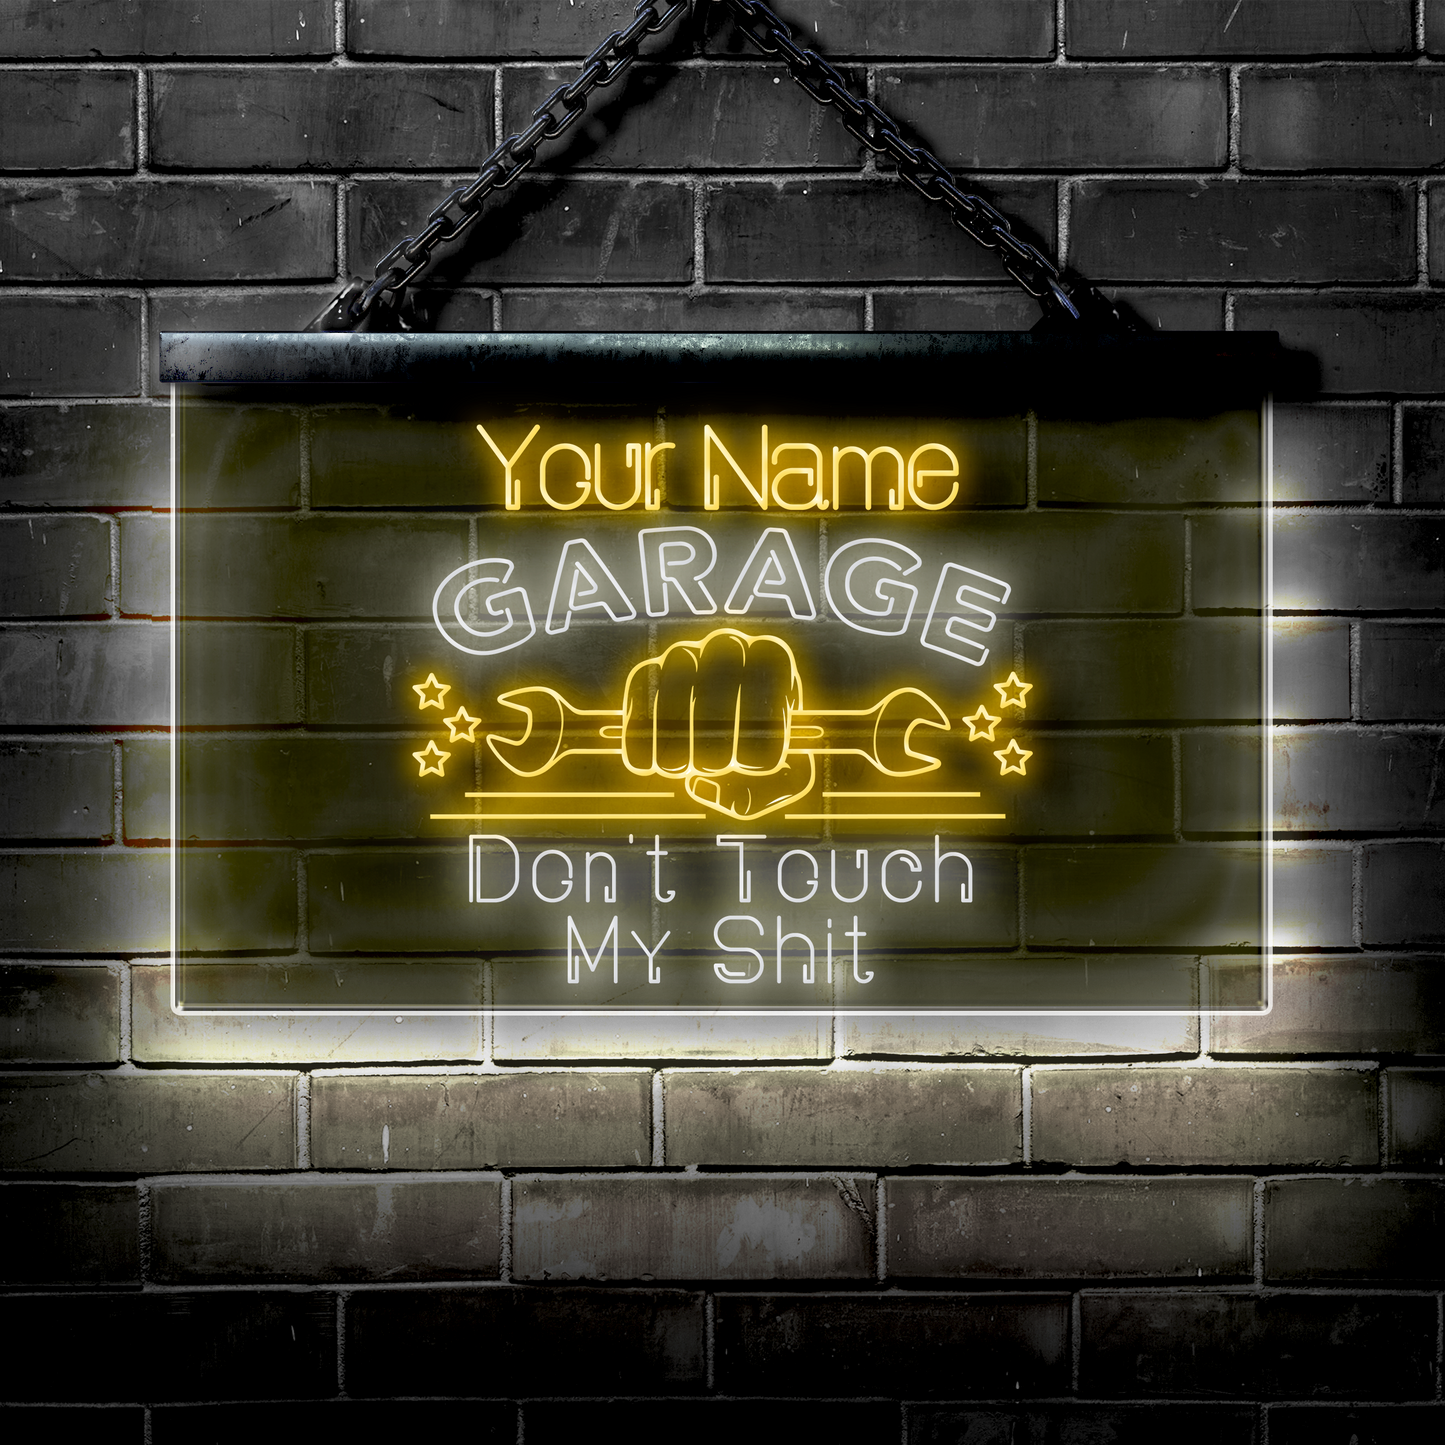 Personalized LED Garage Sign: Don't Touch My Shit